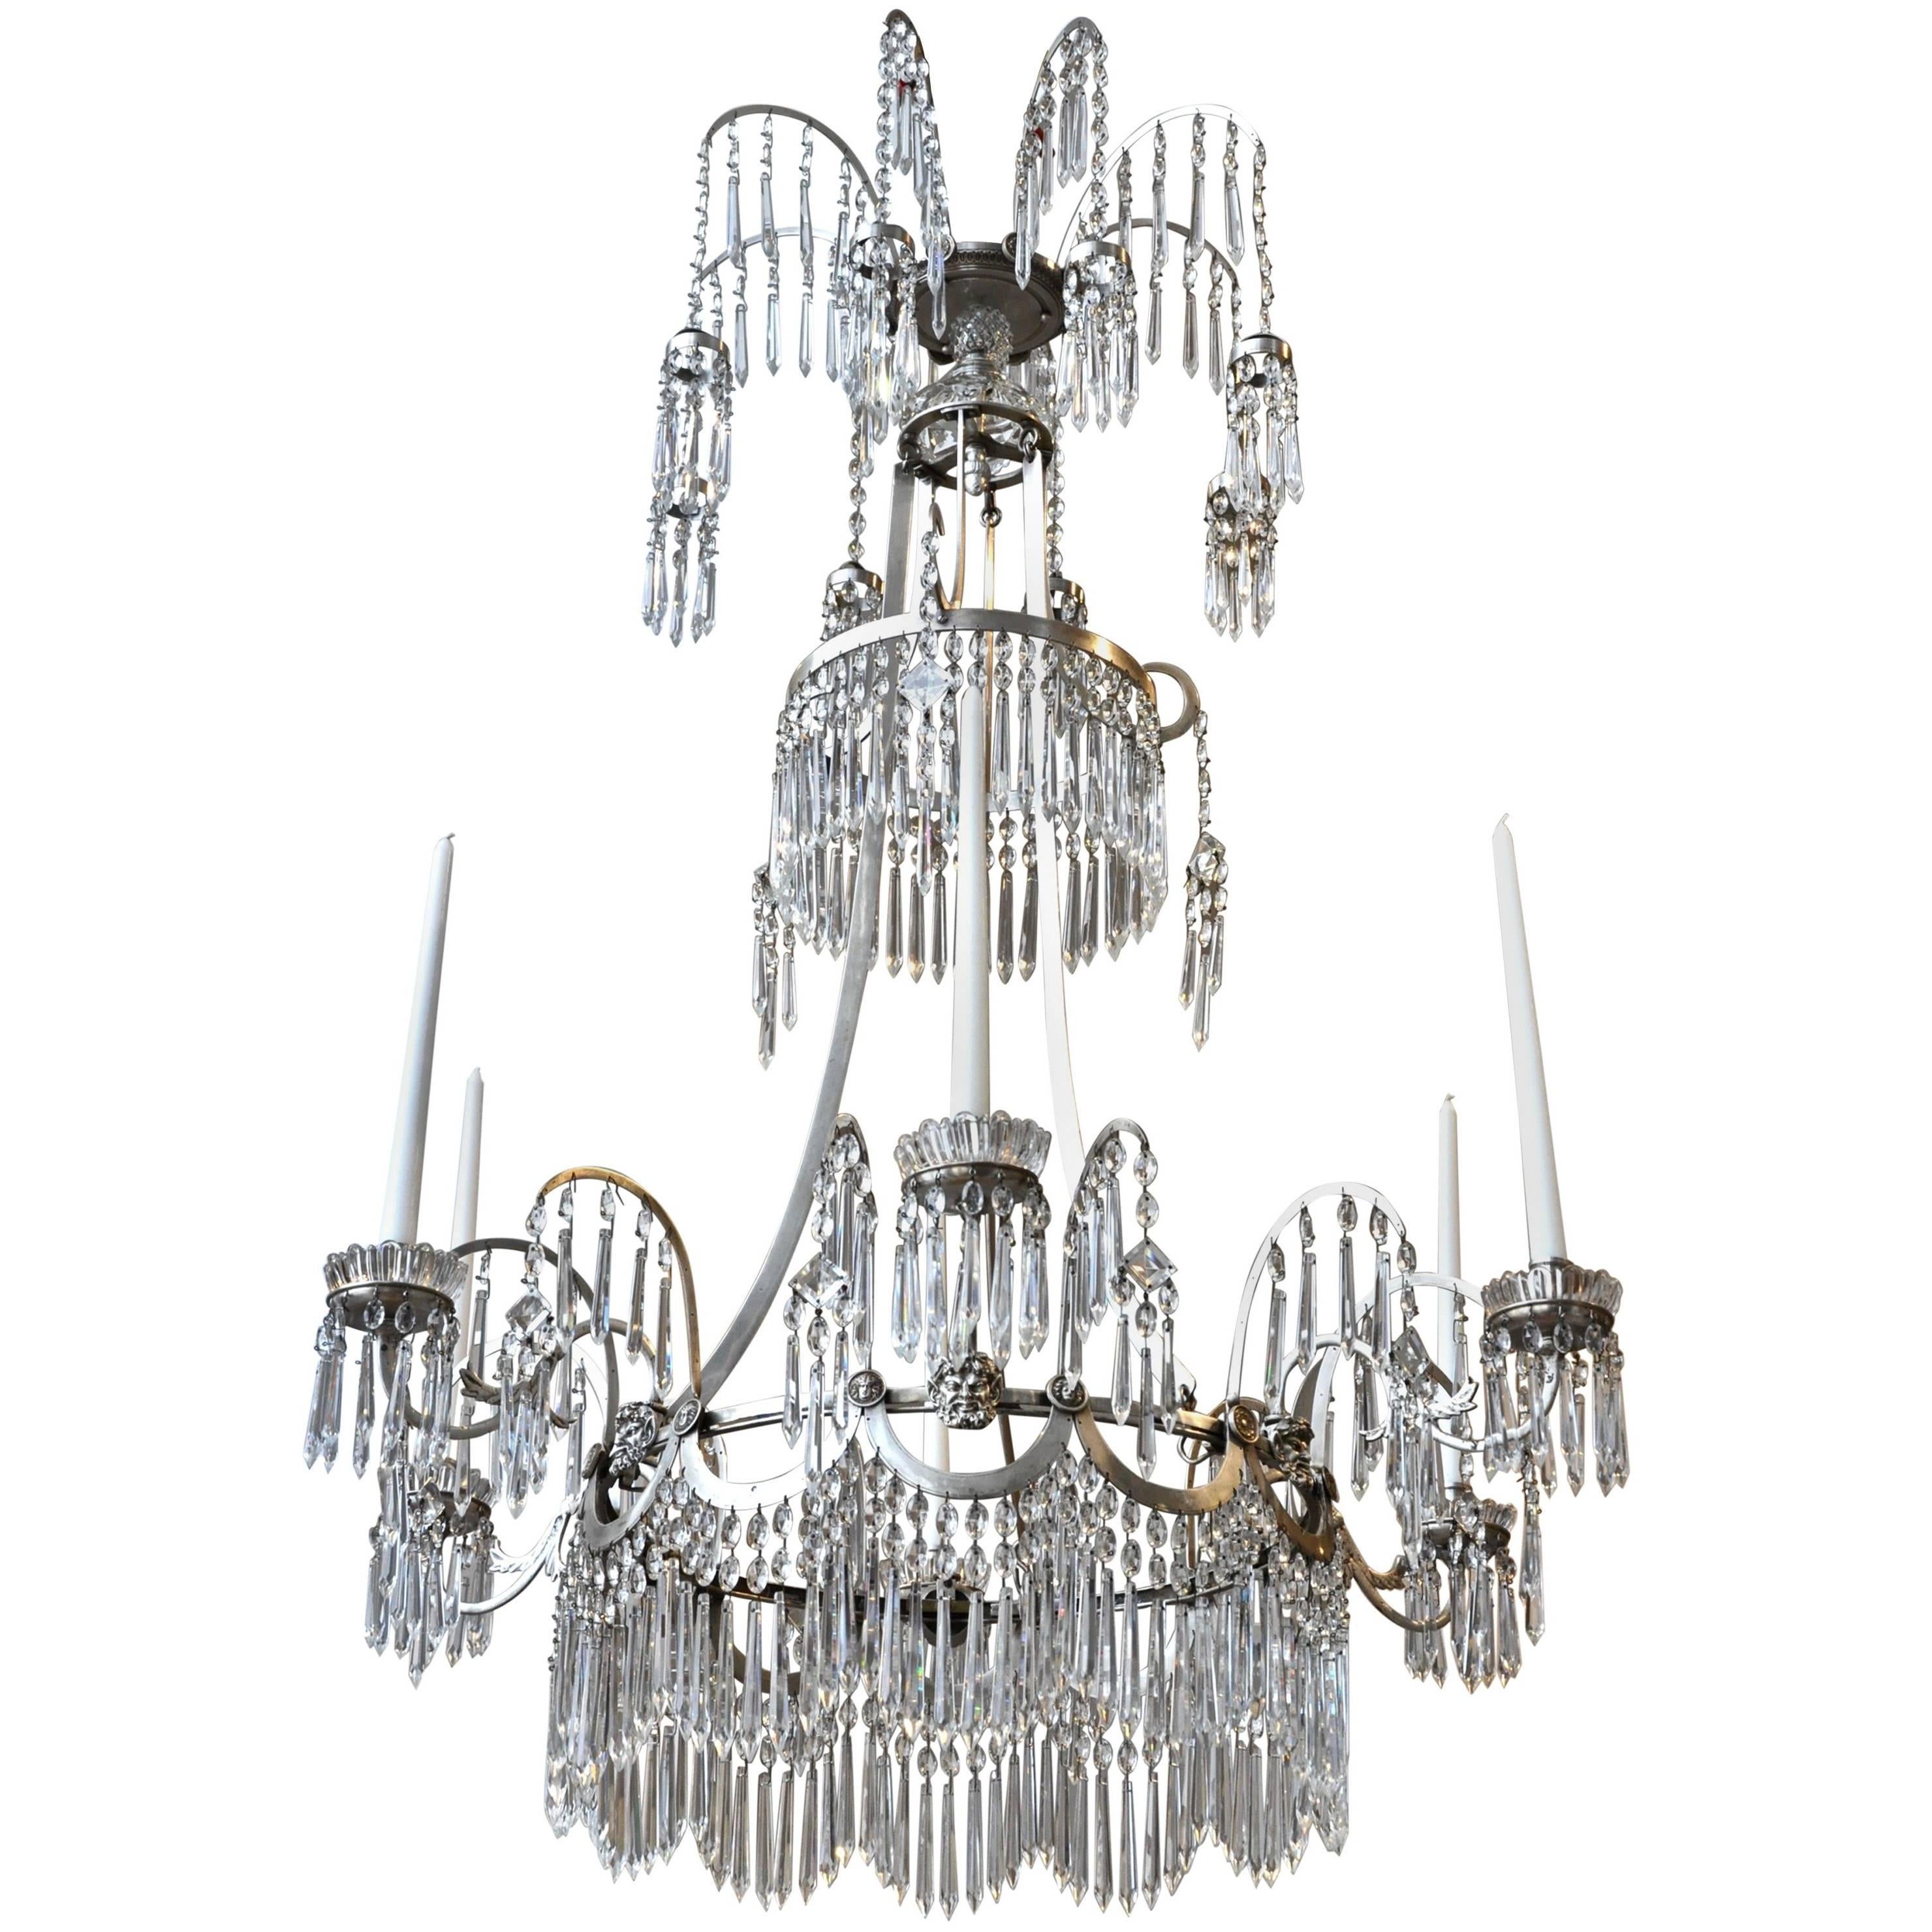 19th Century Baltic Neoclassical Silvered Chandelier